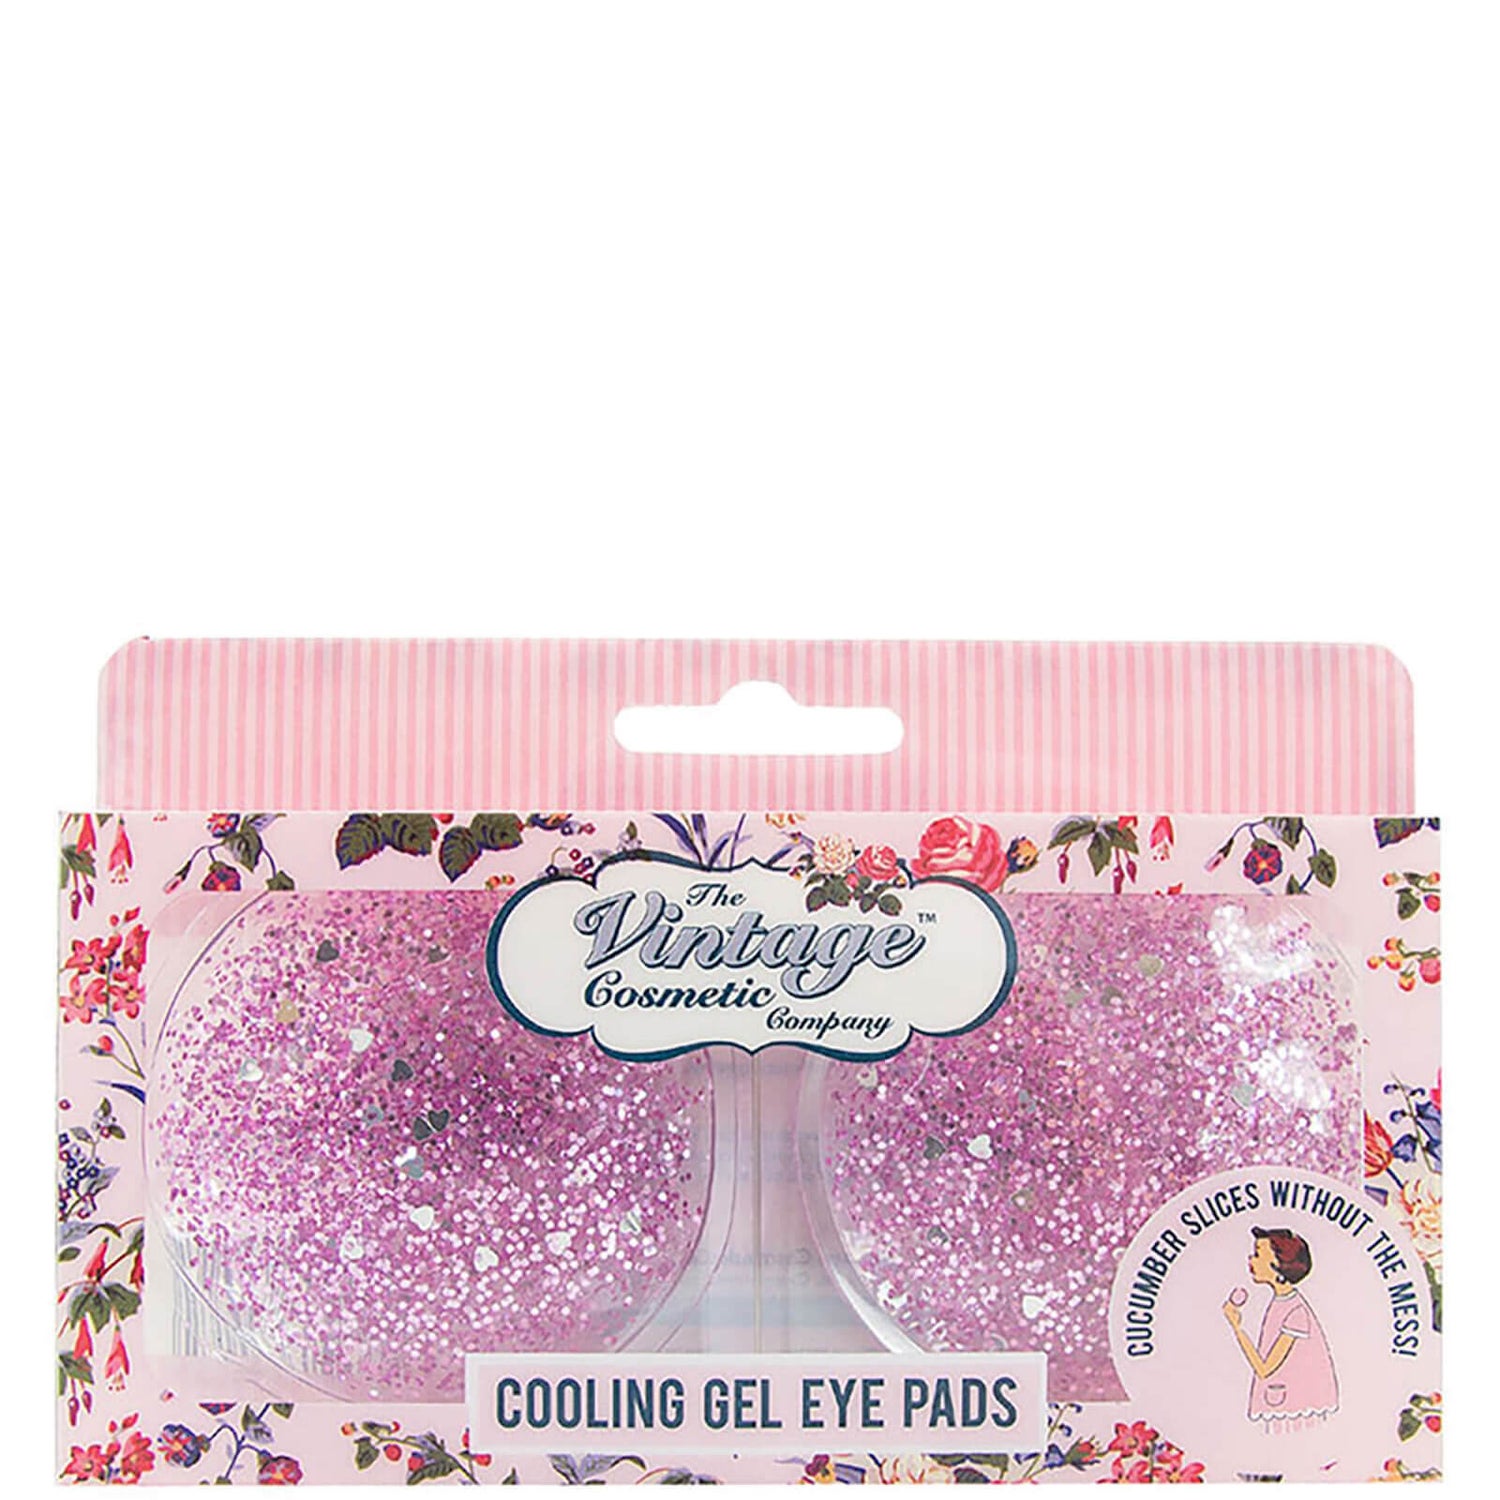 The Vintage Cosmetic Company Cooling Gel Eye Pads Pink Glitter